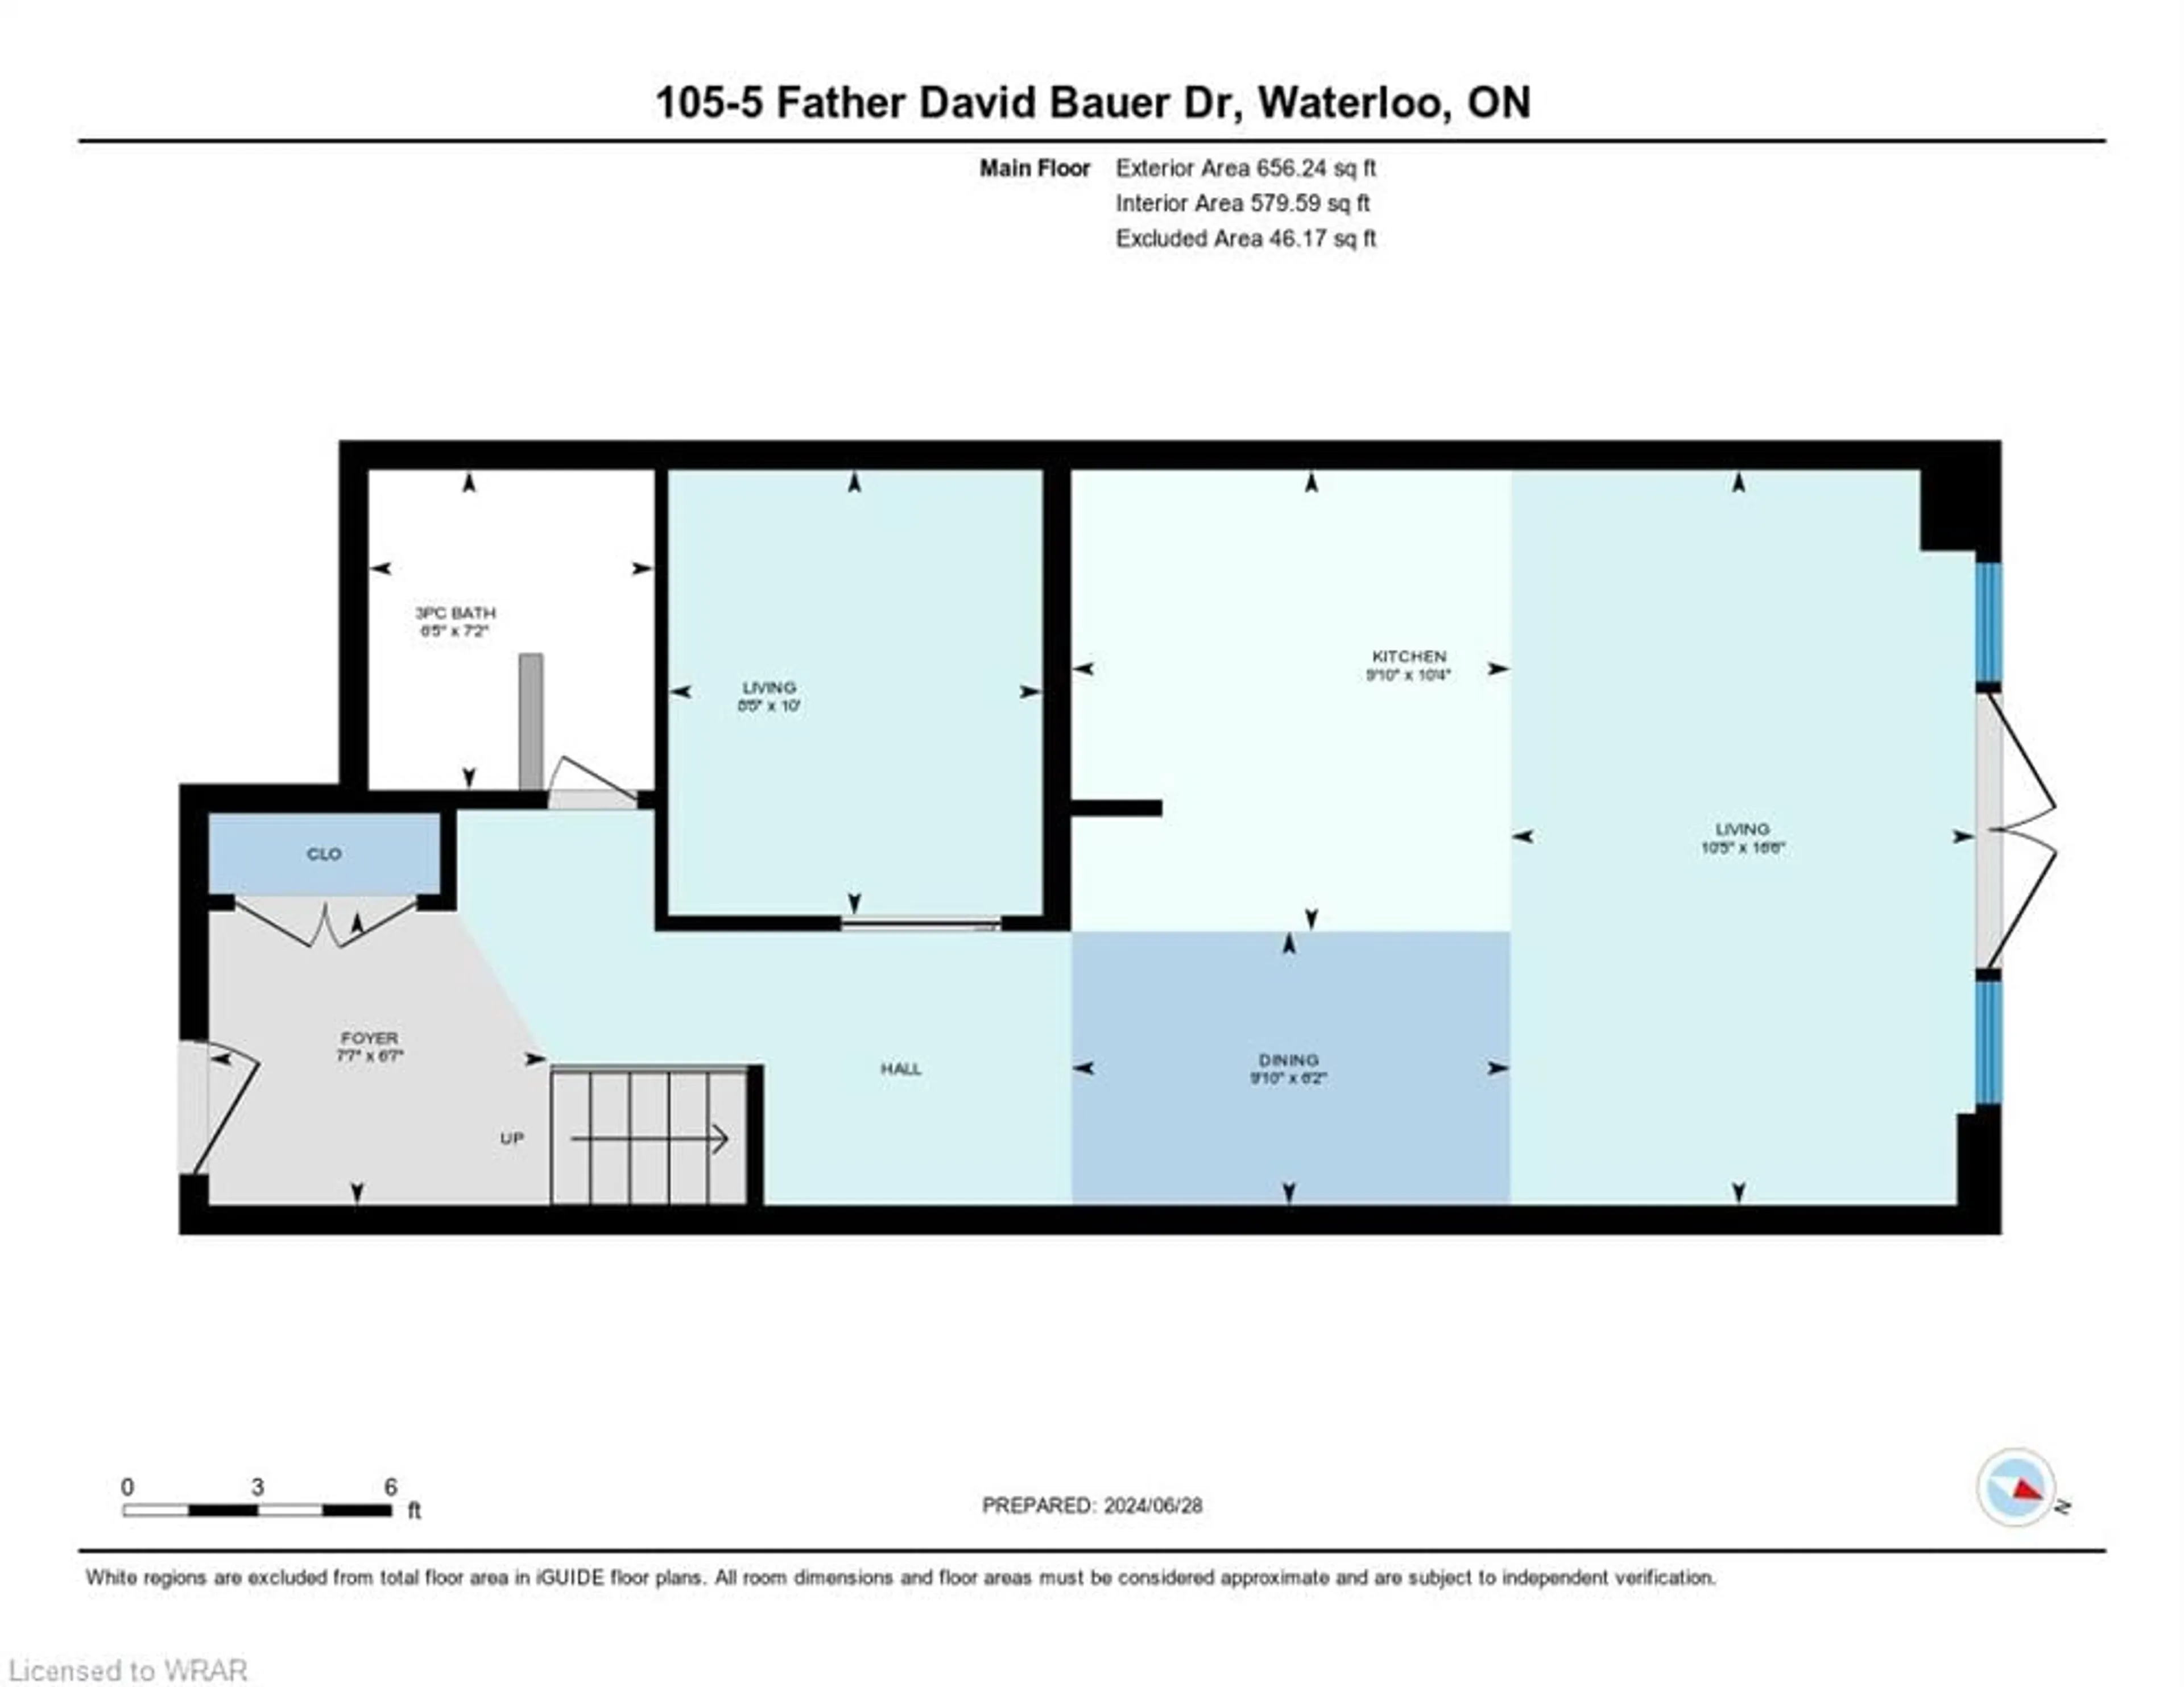 Floor plan for 5 Father David Bauer Dr #105, Waterloo Ontario N2L 6M2